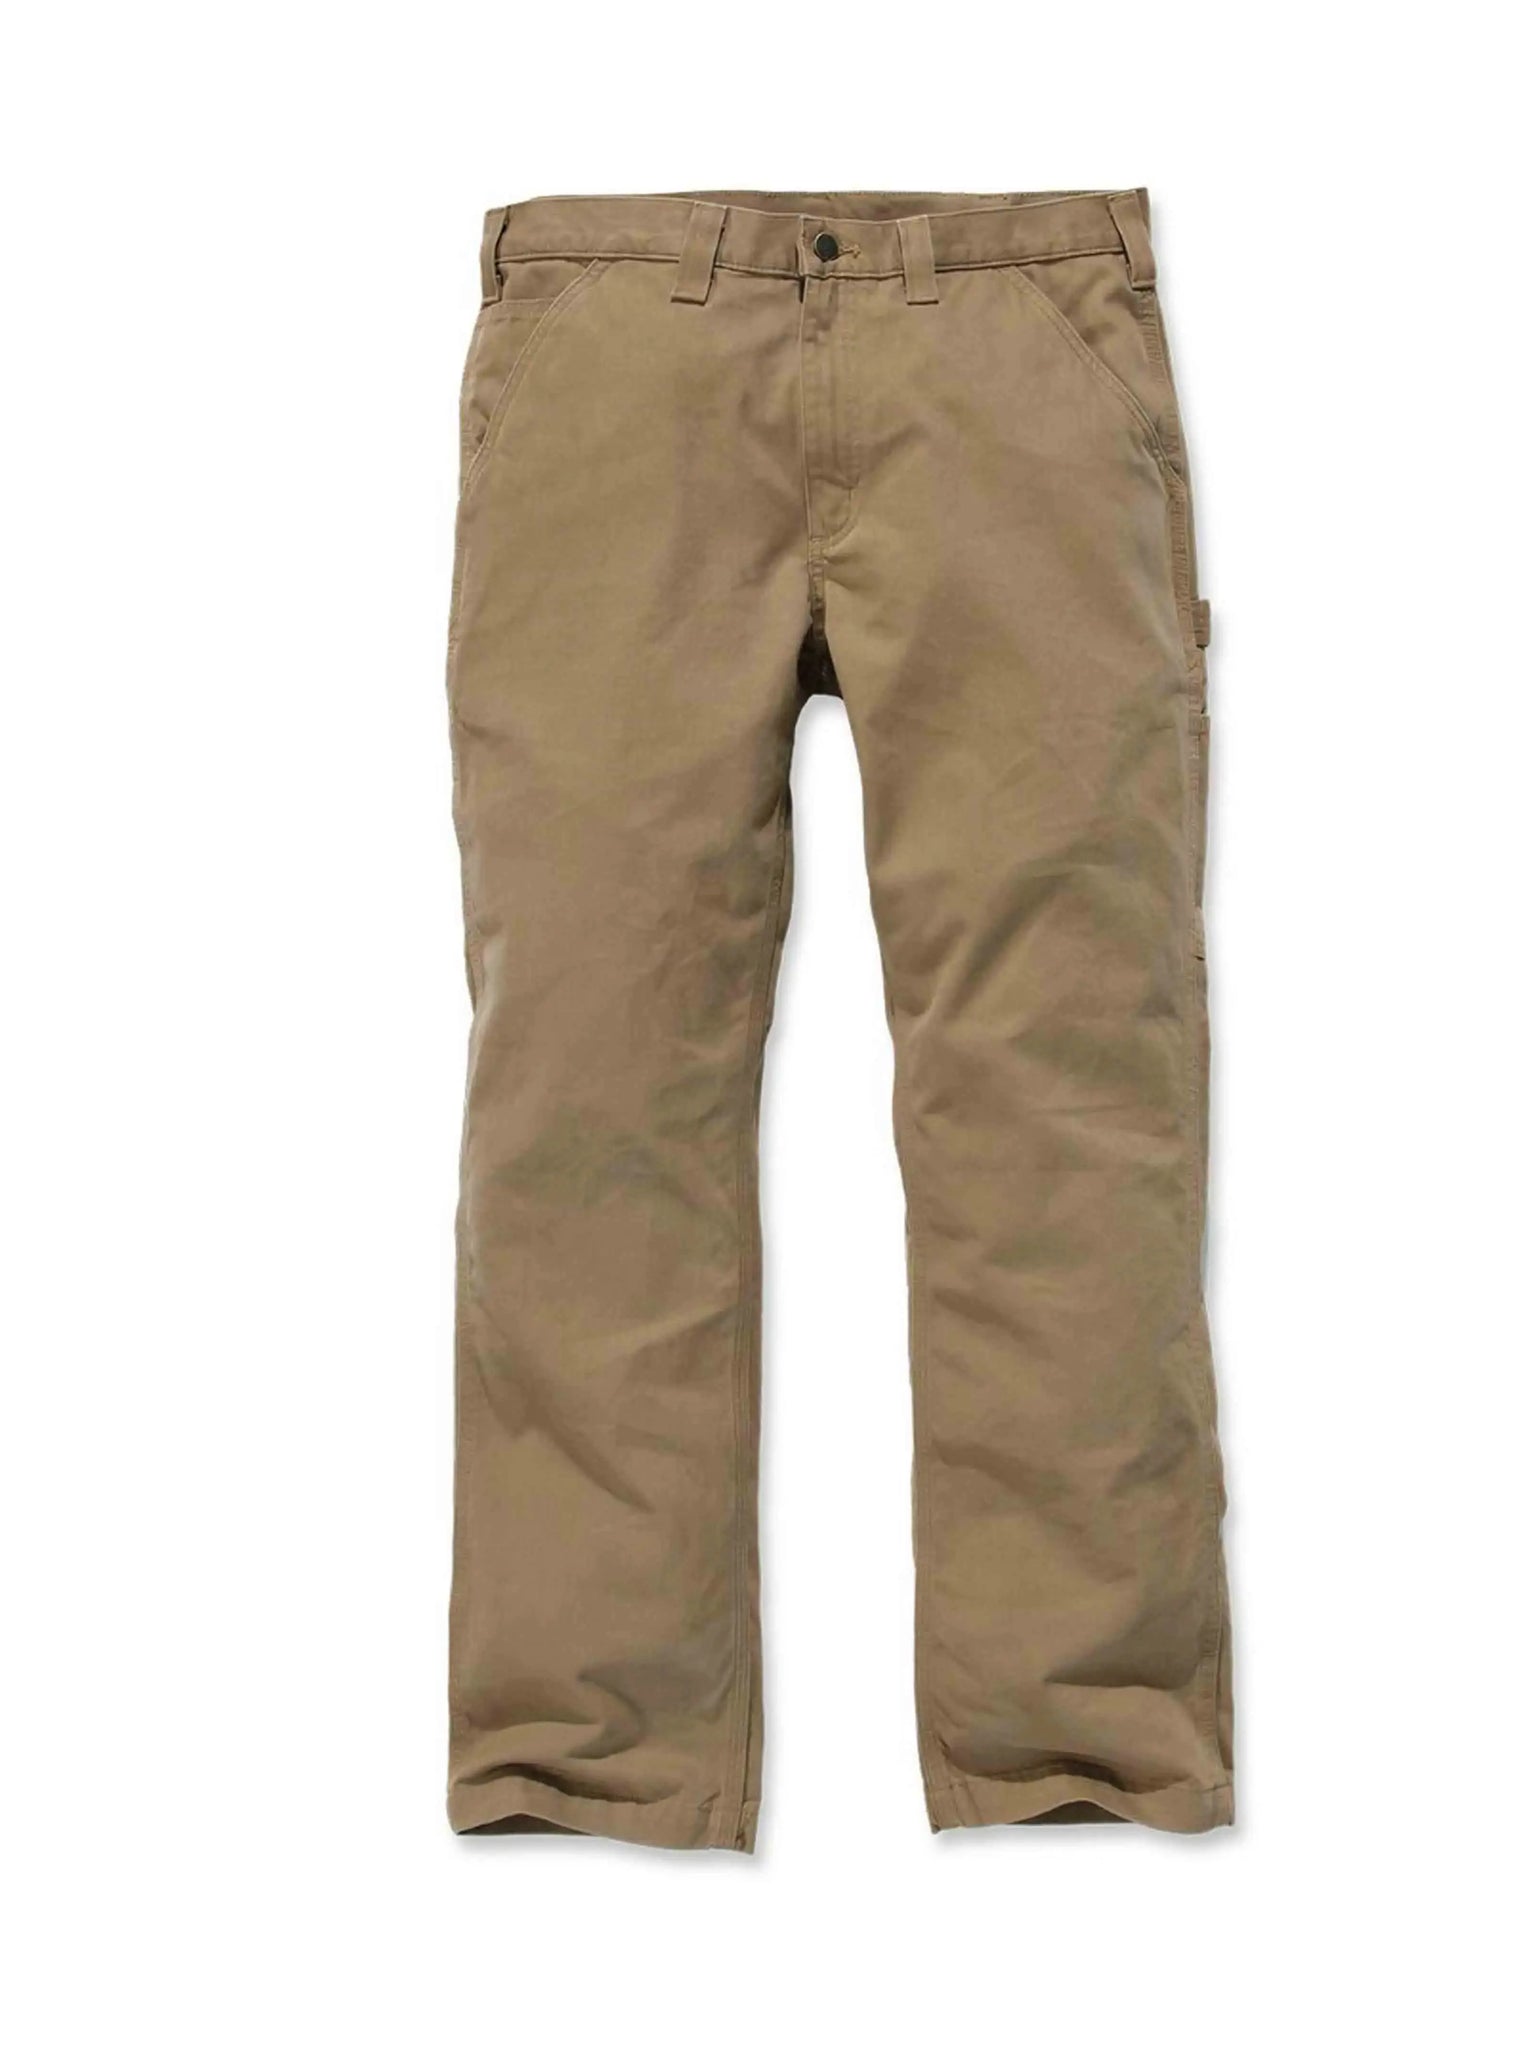 Carhartt Washed Twill Relaxed Fit Pant Dark Khaki - Prior